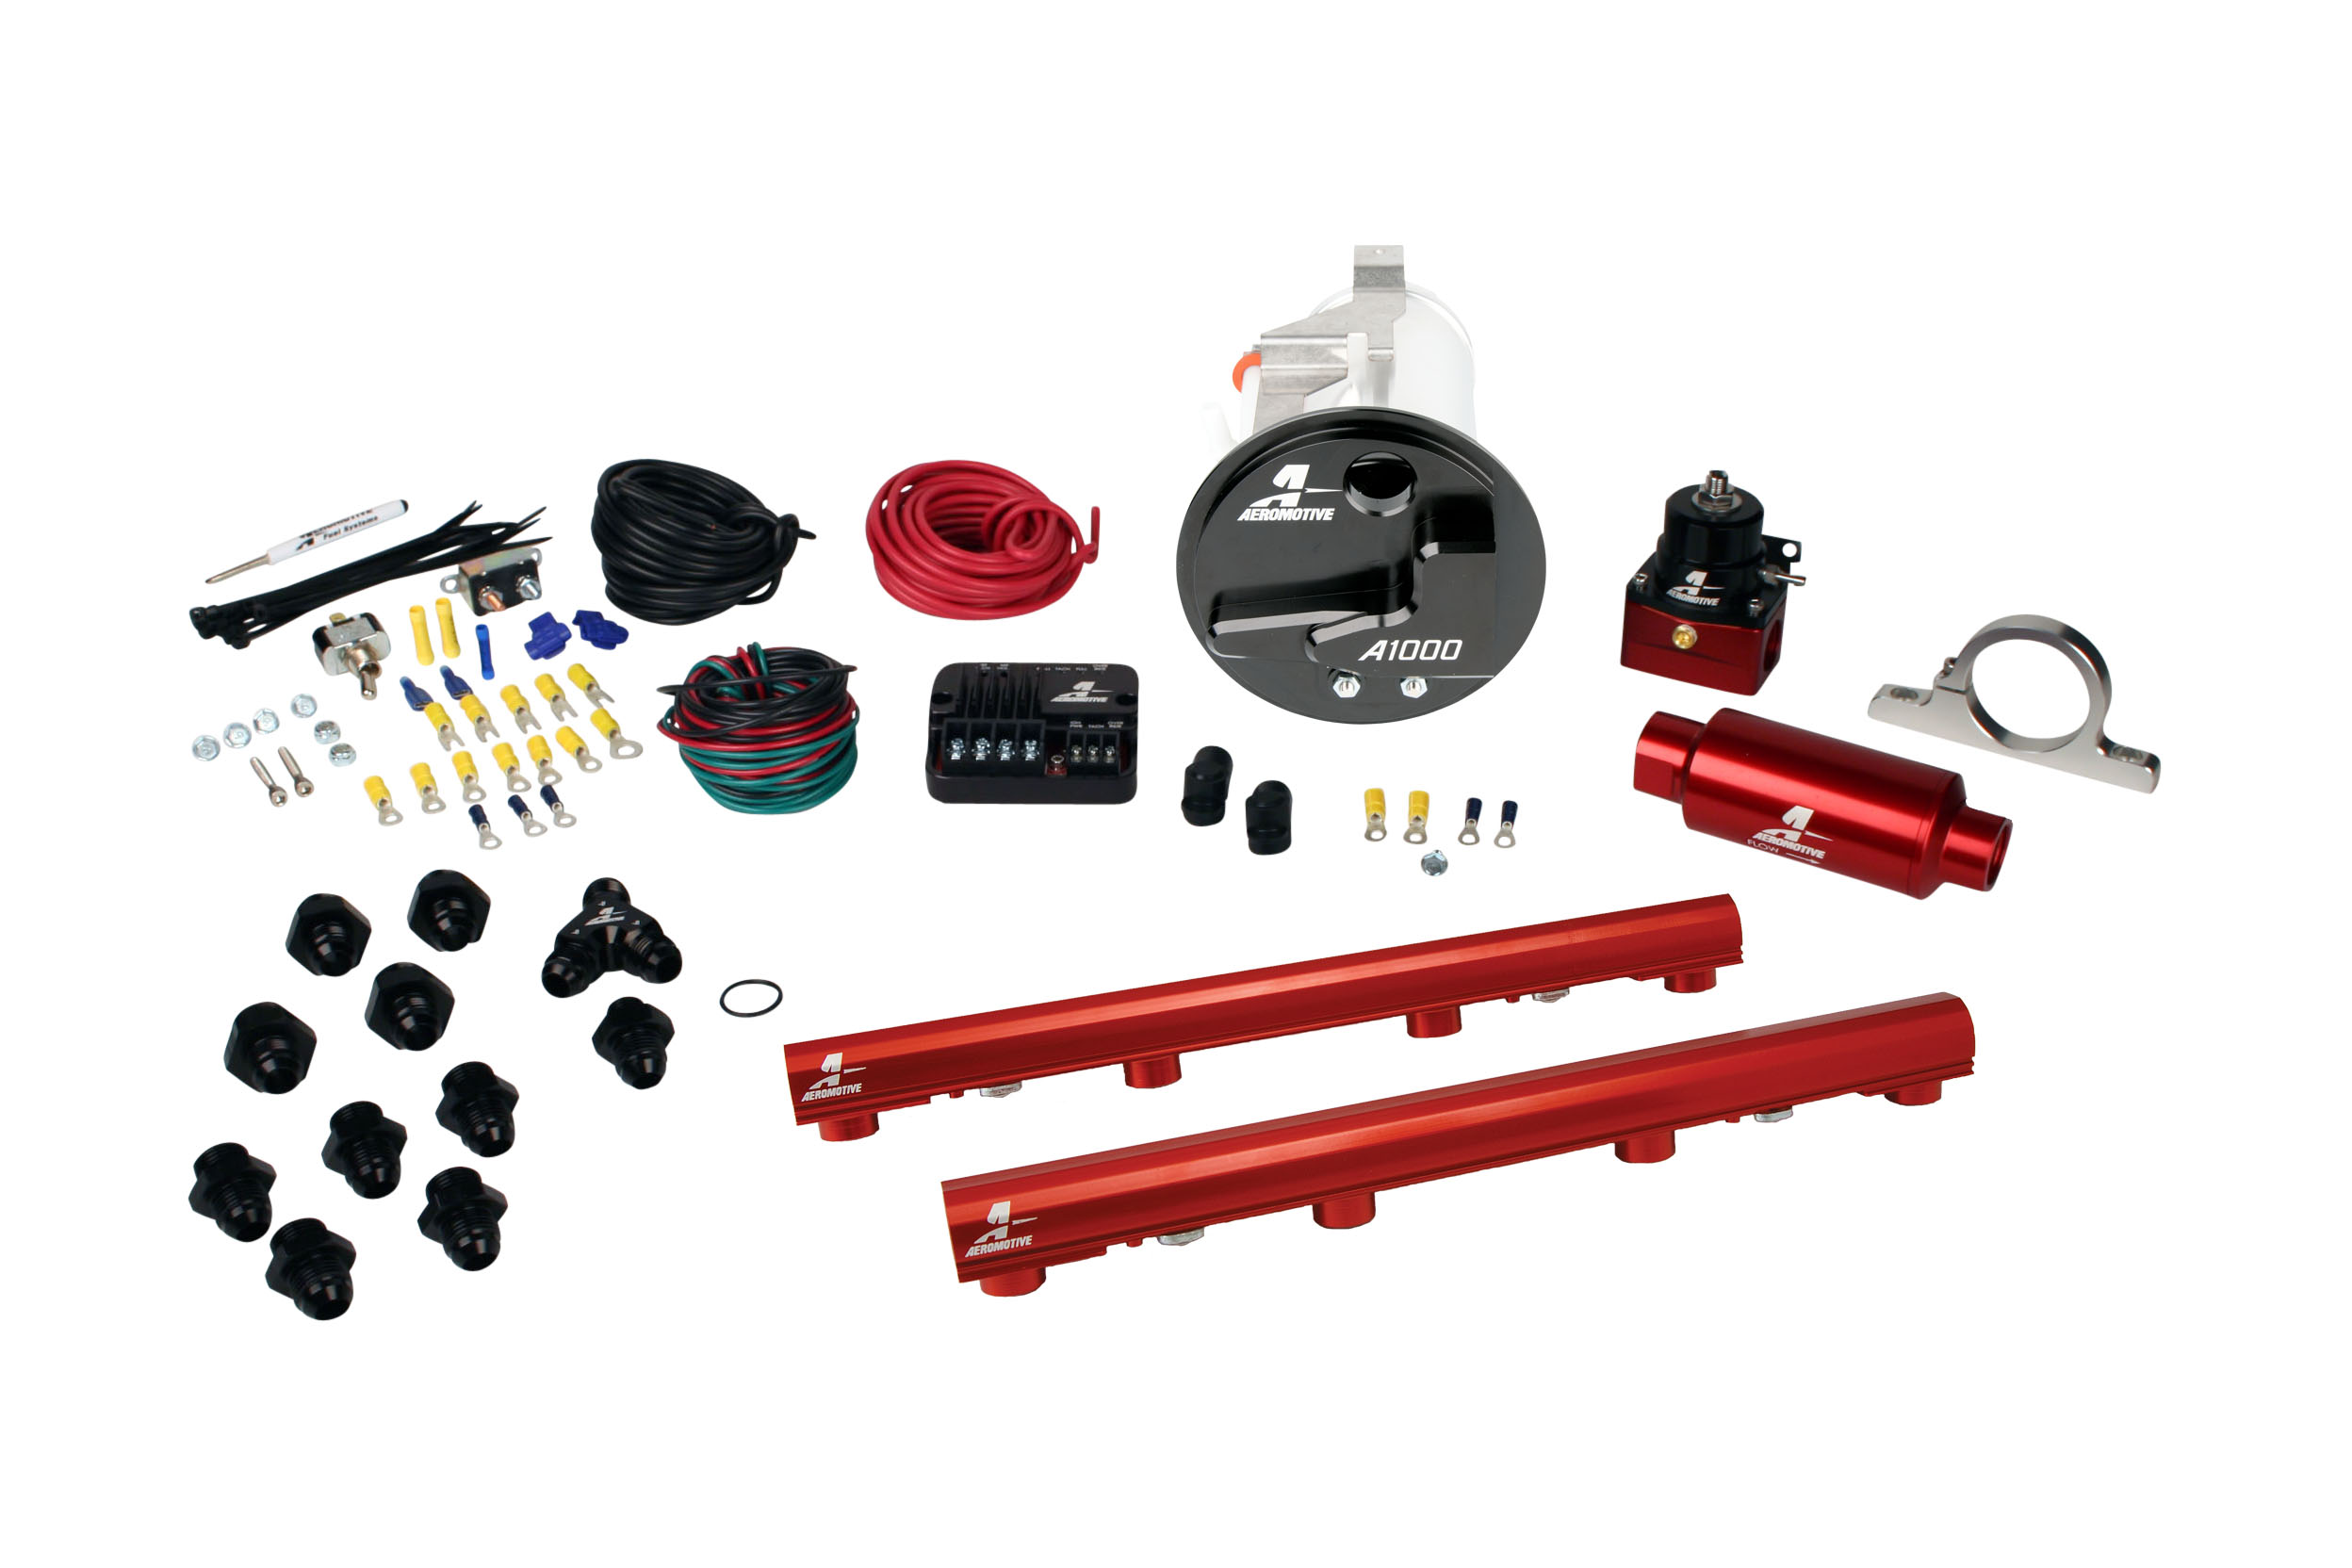 Mustang GT 05-09 Stealth A1000 Street Fuel System